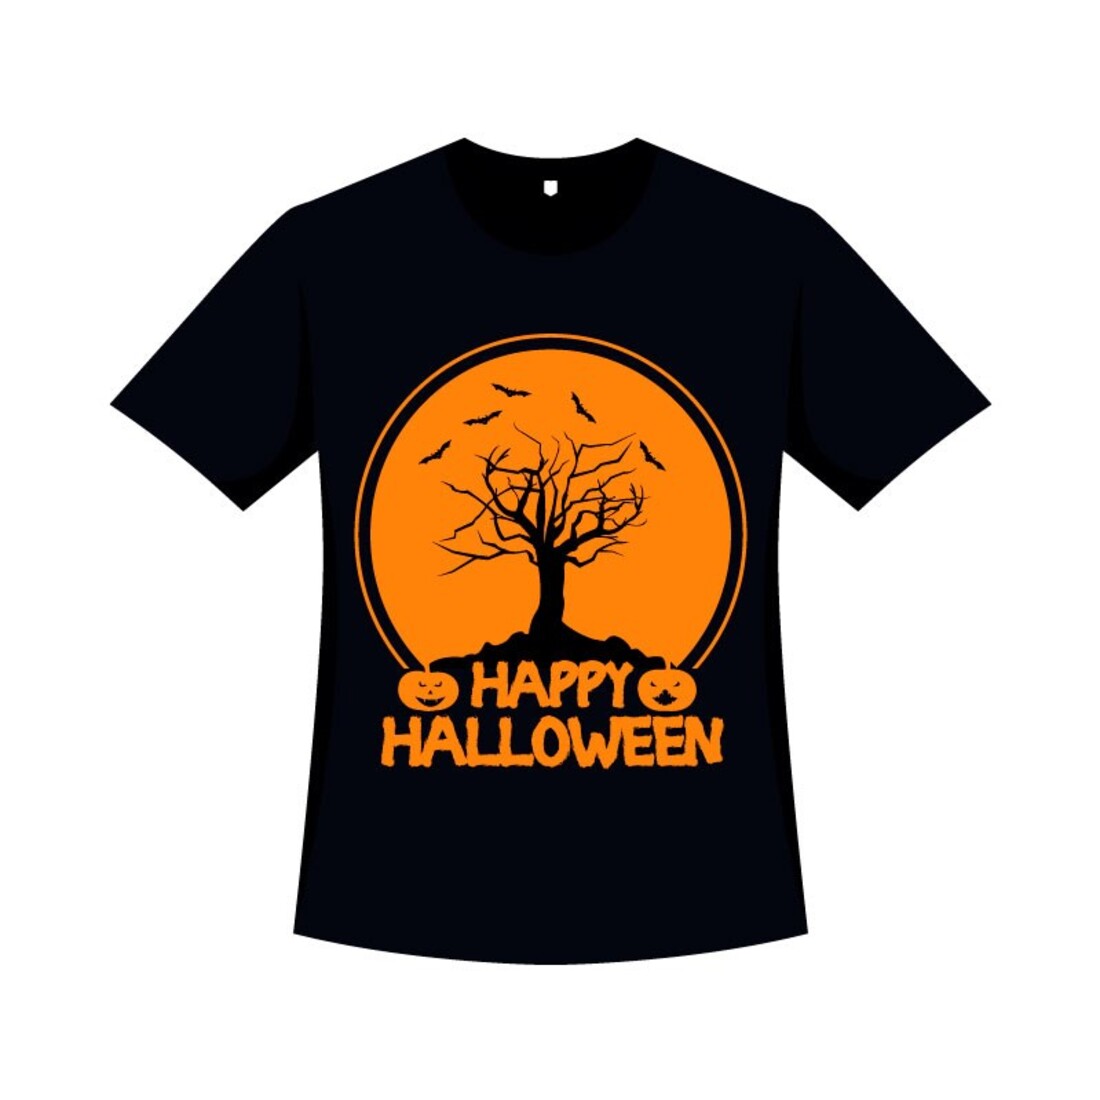 Halloween Tree Silhouette T-shirt cover image.